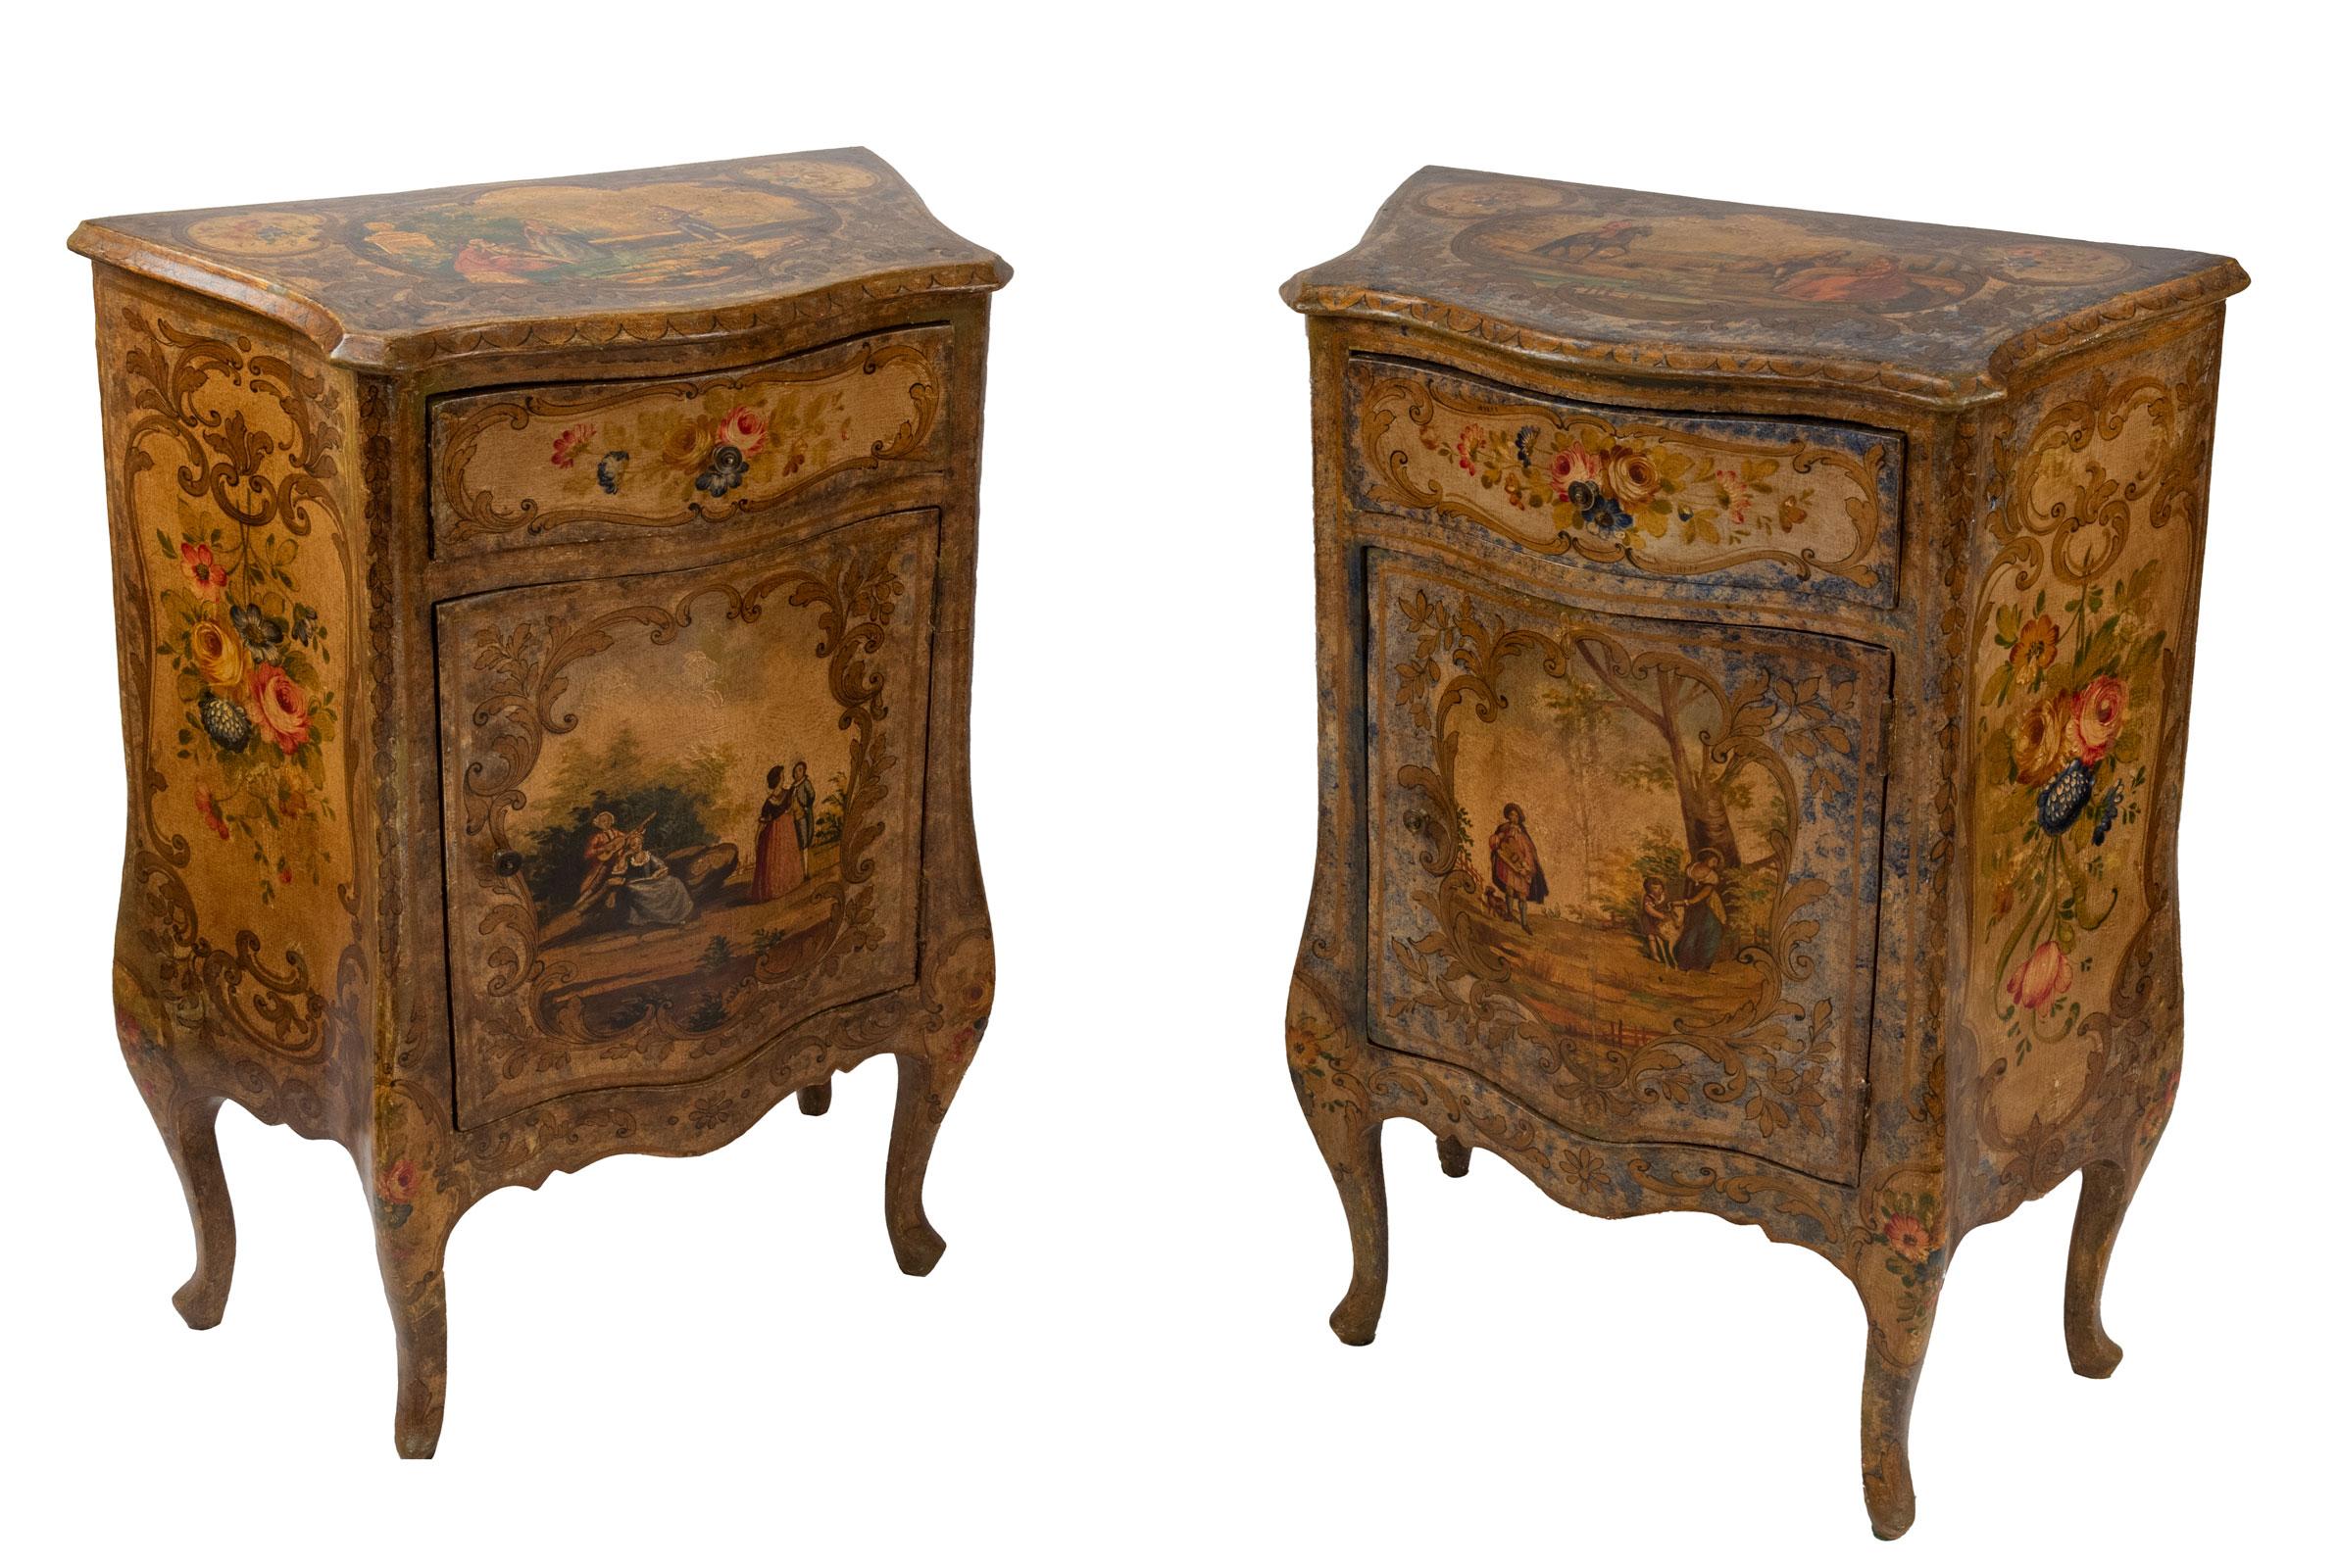 A pair of Venetian commodes or nightstands painted with floral sprays and country scenes.